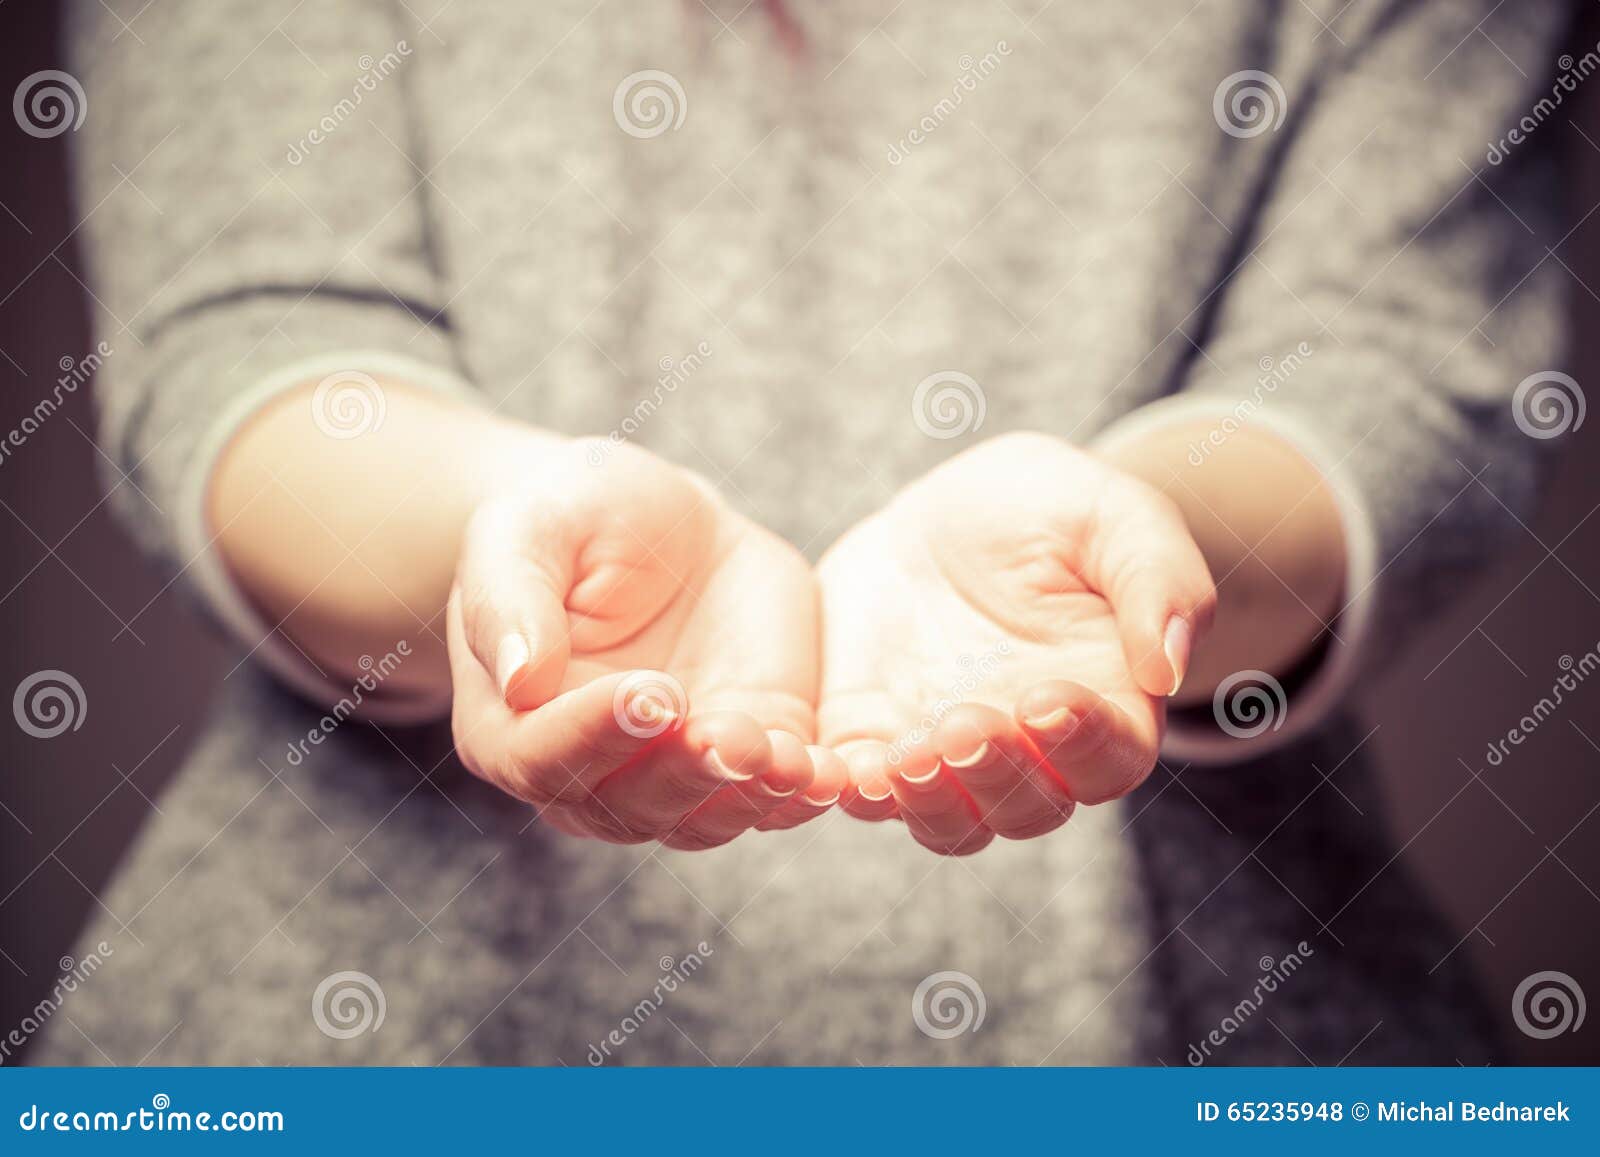 light in young woman's hands. sharing, giving, offering, taking care, protection.